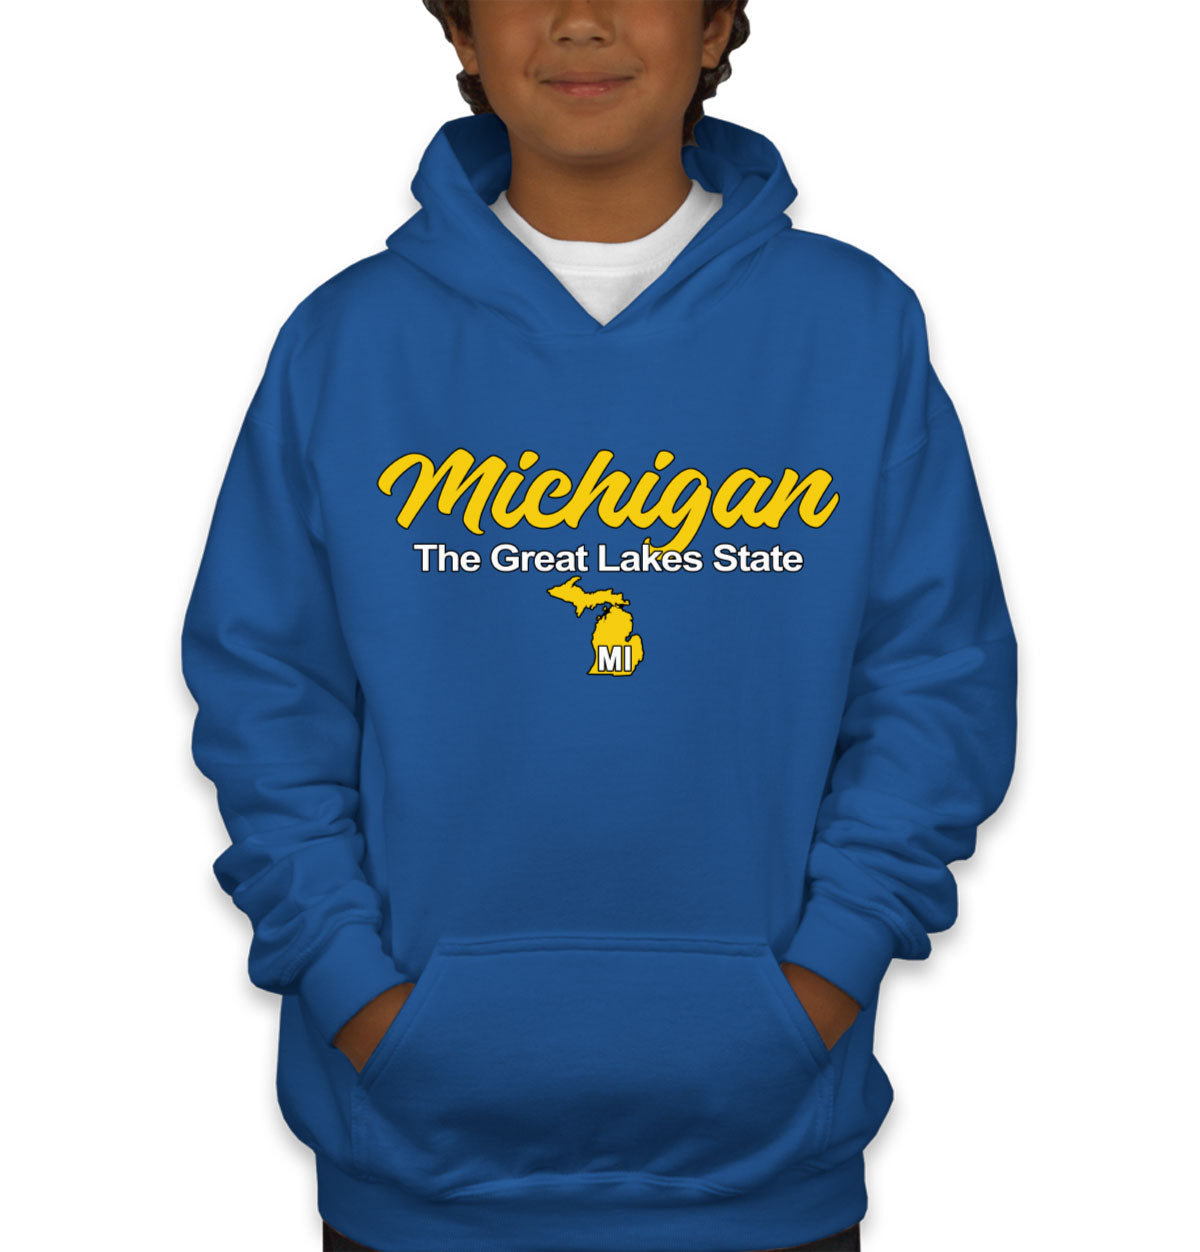 Michigan The Great Lakes State Youth Hoodie